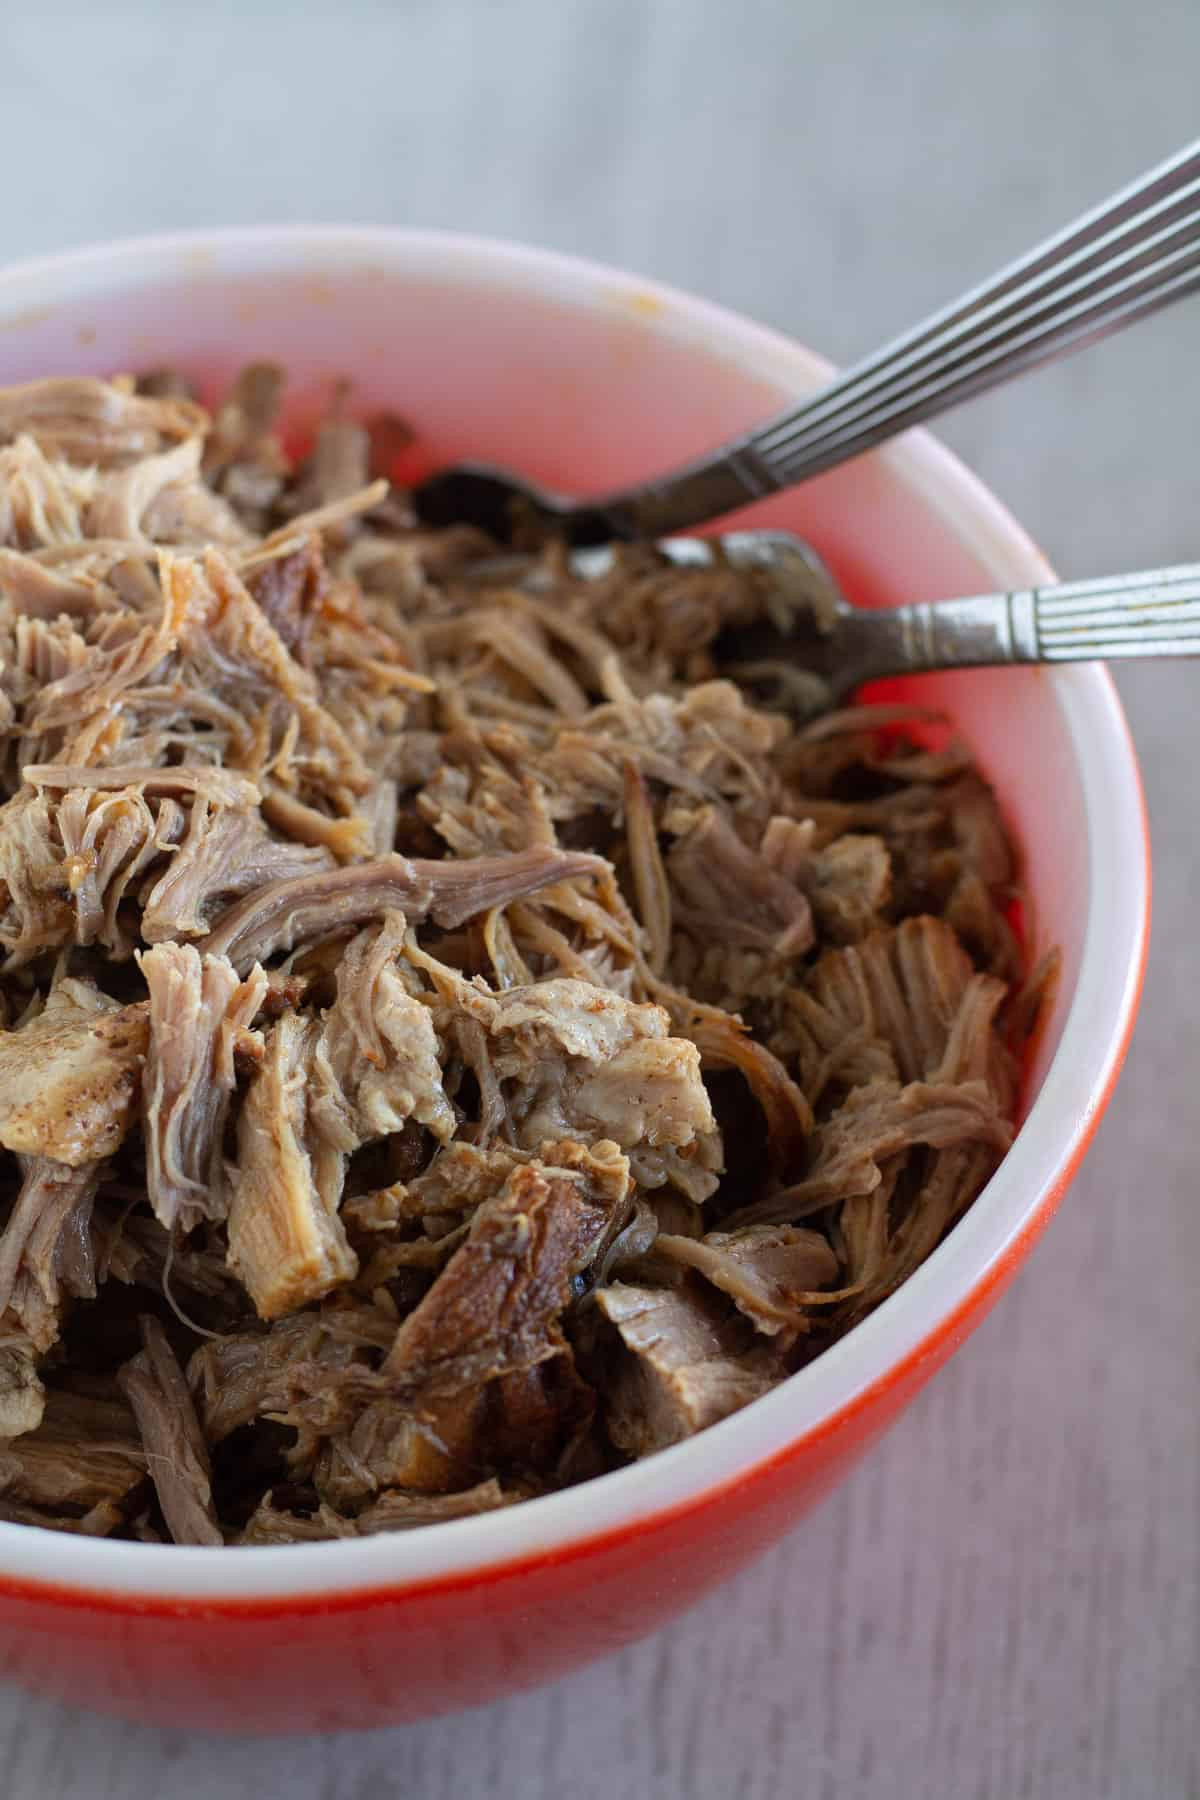 Pulled Pork Slow Cooker Keto
 Whole30 And Keto Pulled Pork Instant Pot Slow Cooker